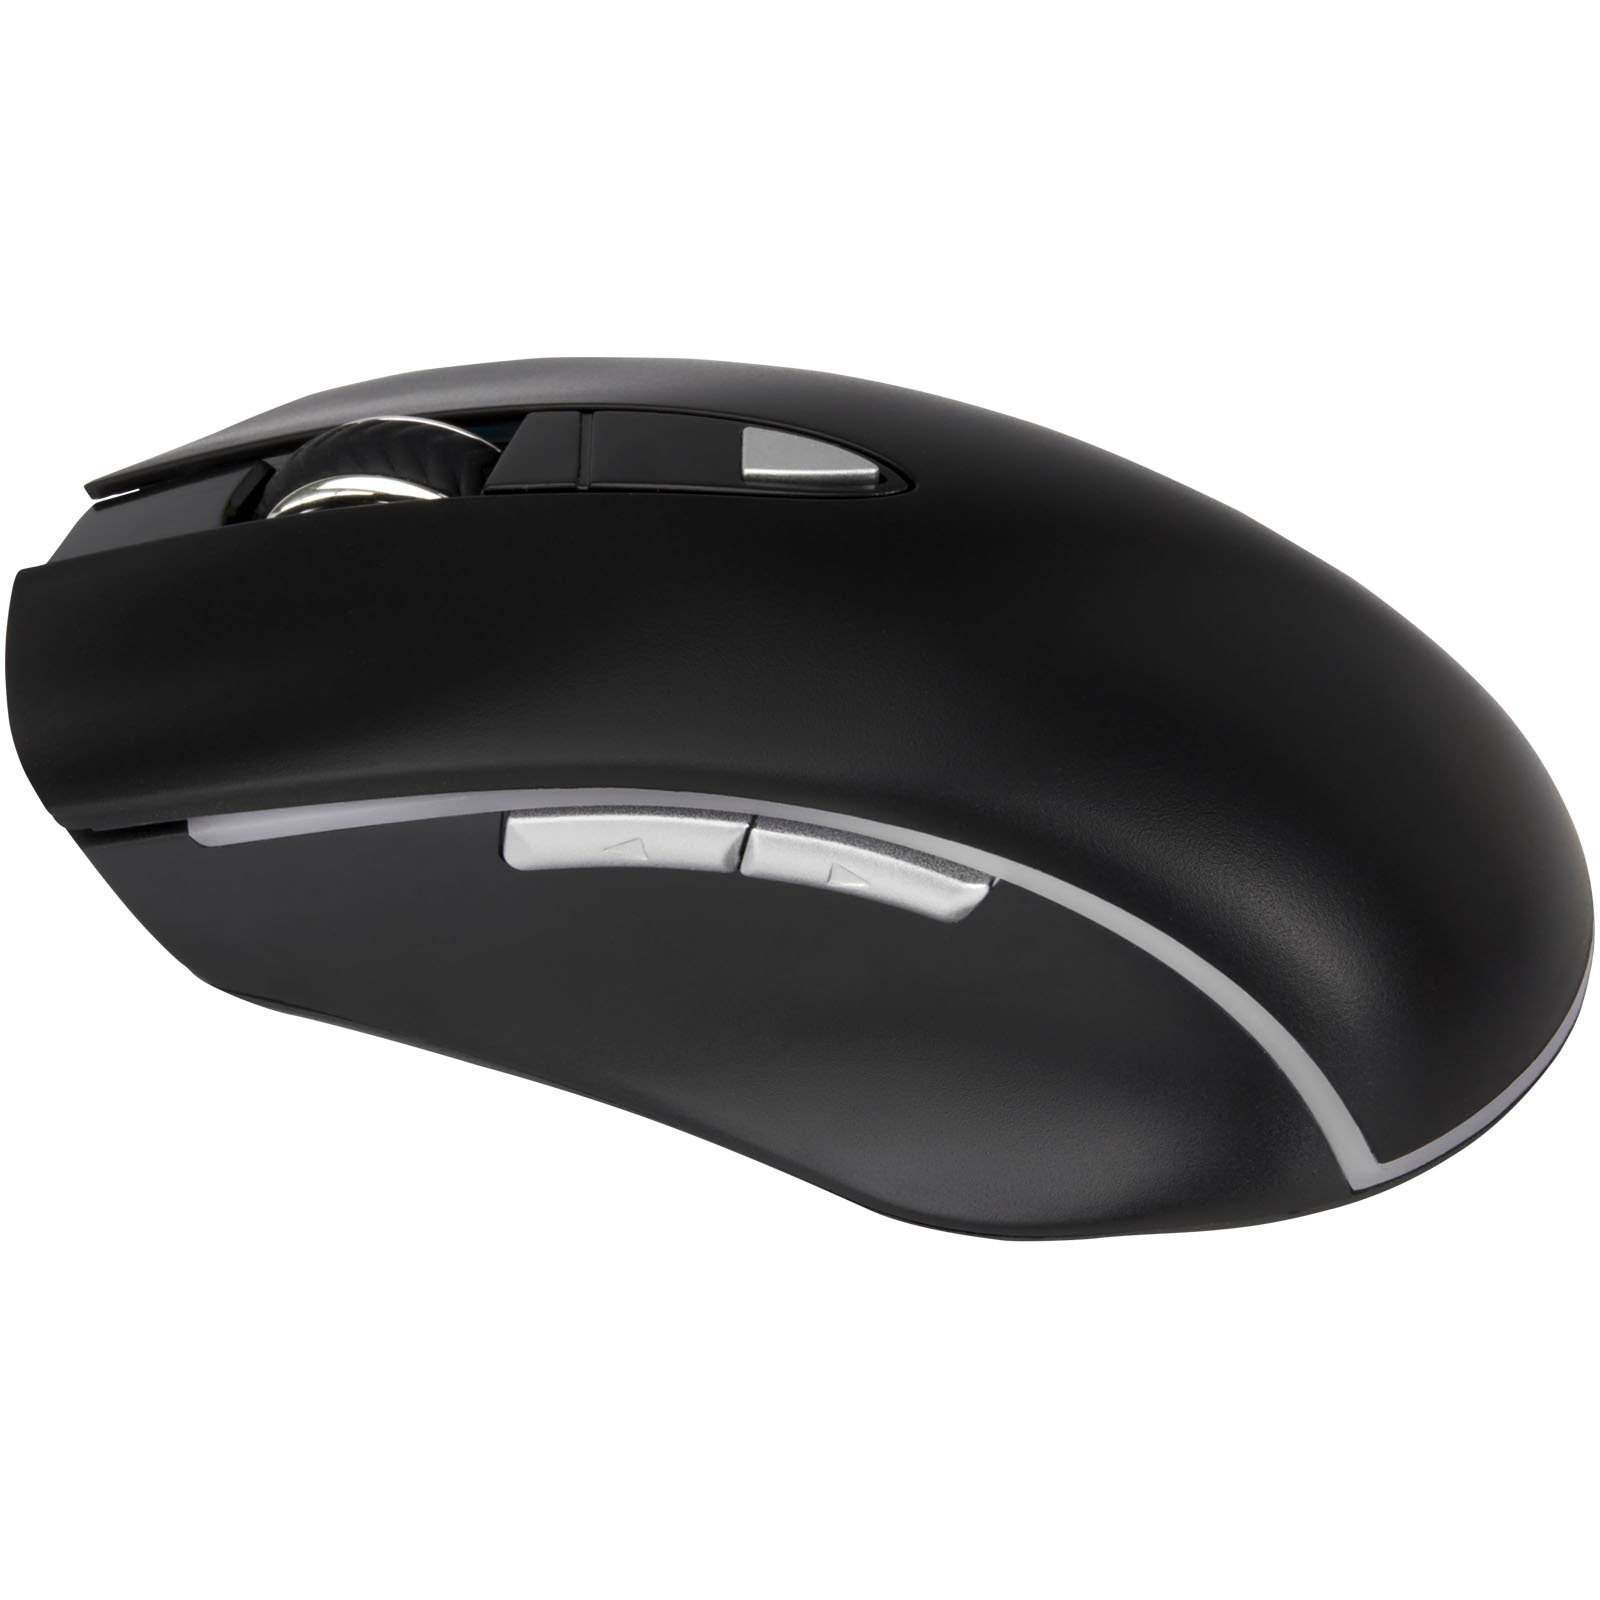 Advertising Computer Accessories - Gleam light-up mouse - 2